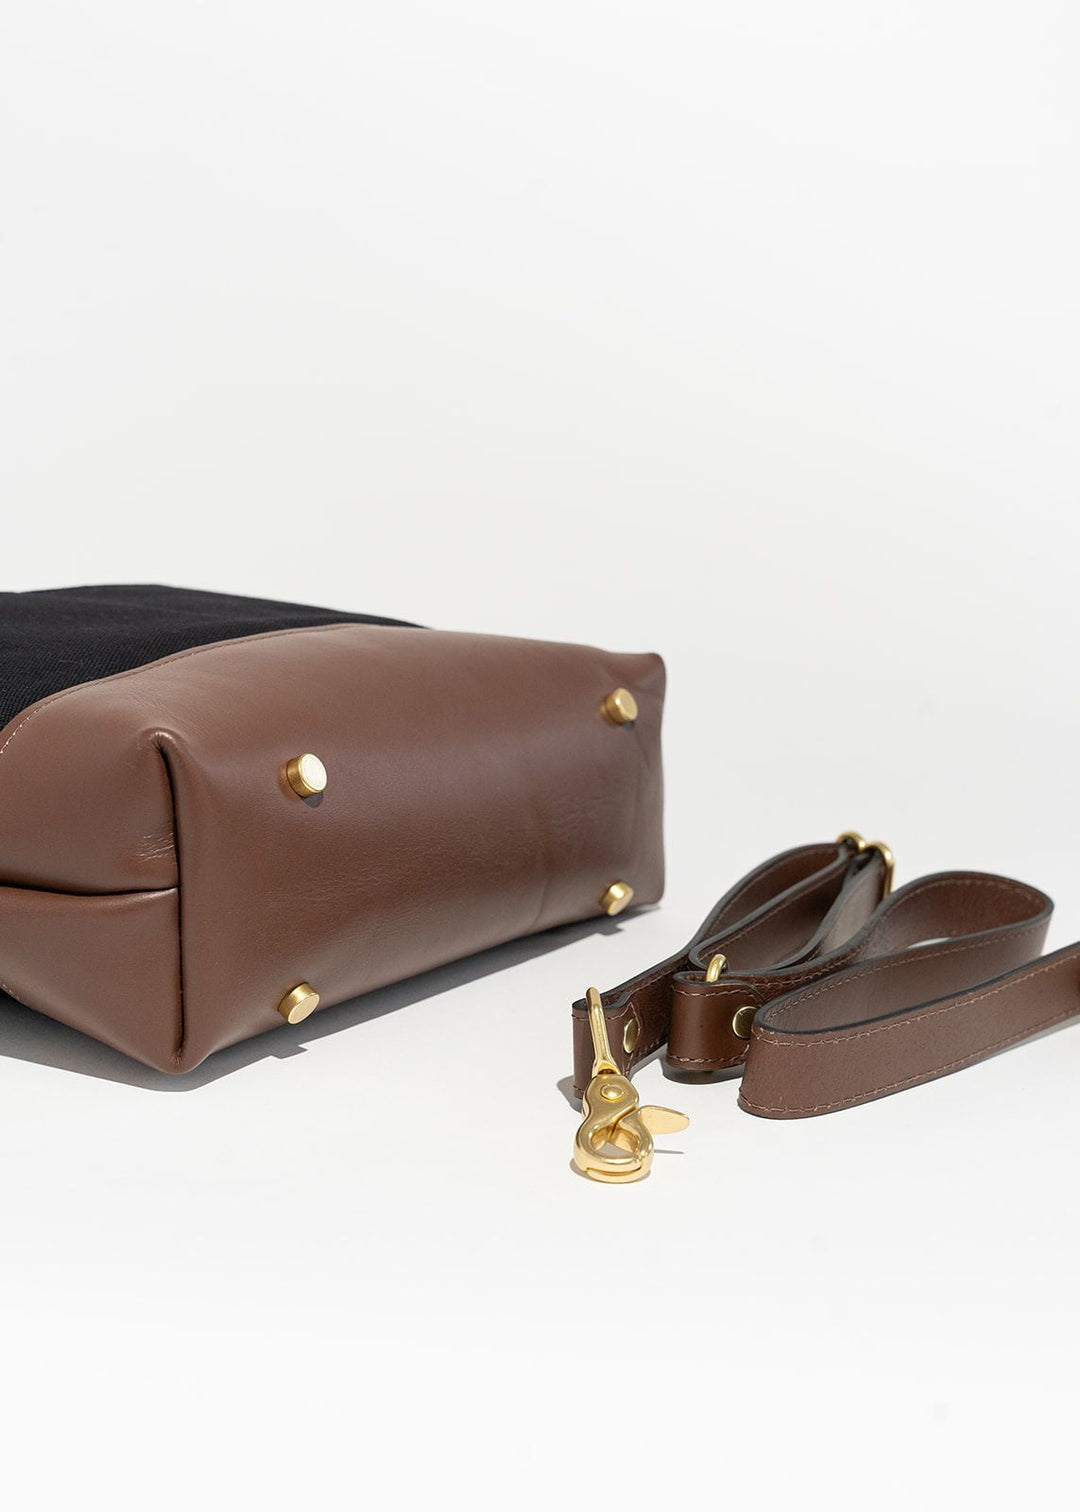 The Belt Bag in Black & Canvas Gingham, Bags & Accessories